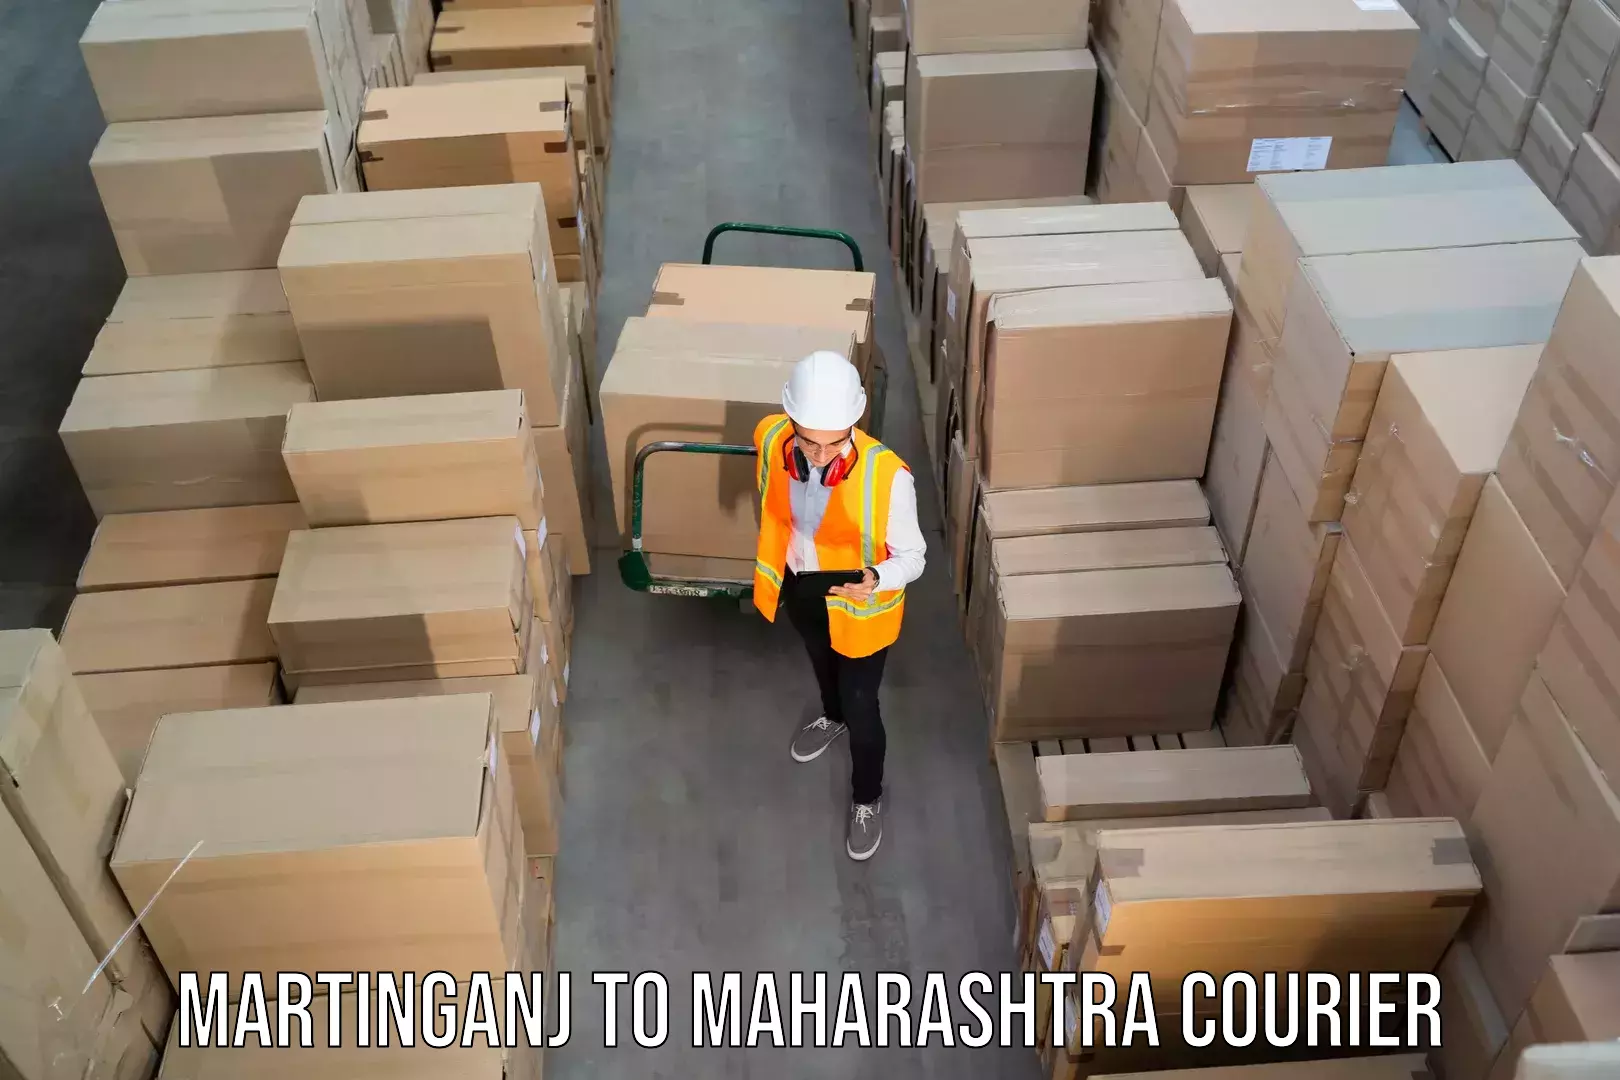 Next-day freight services Martinganj to Dhule